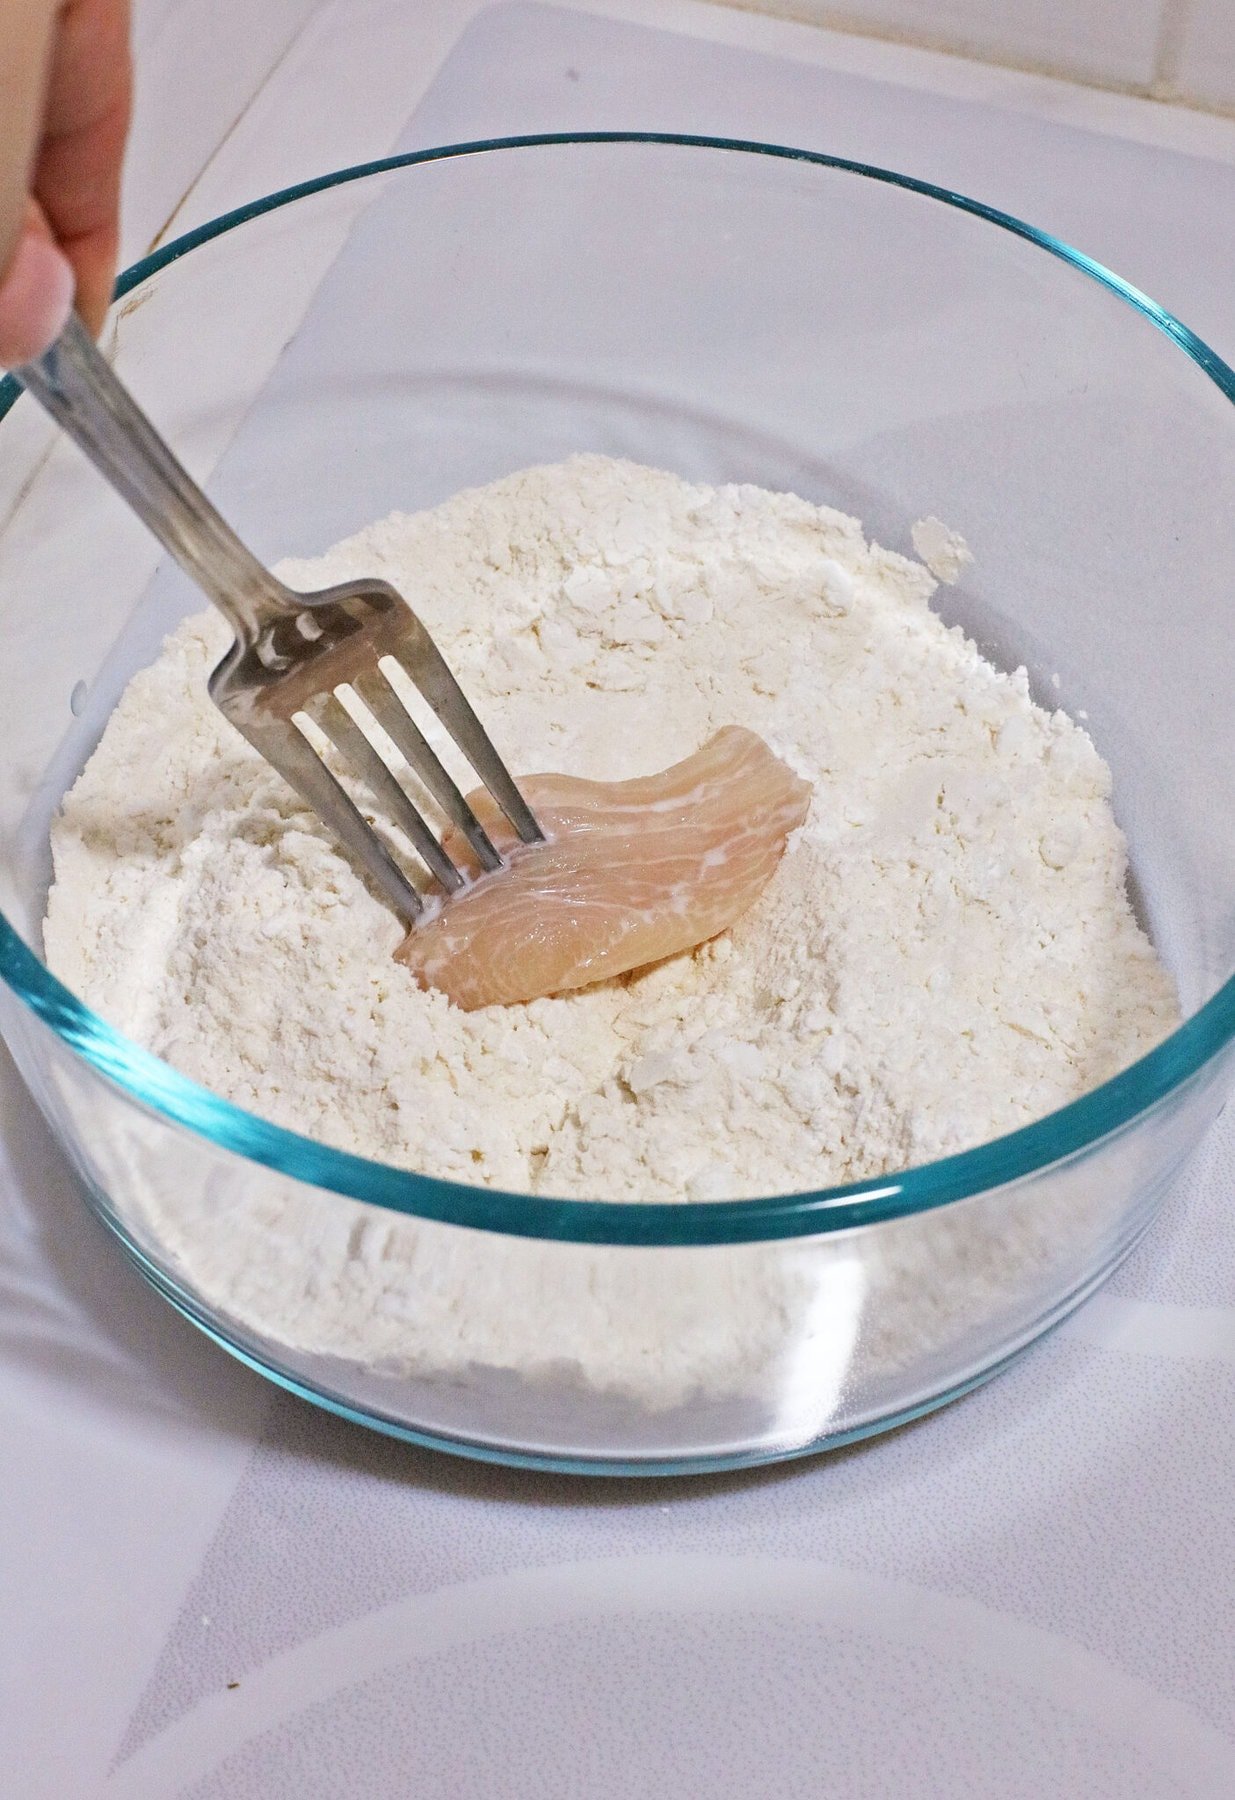 Dipping the chicken in flour.